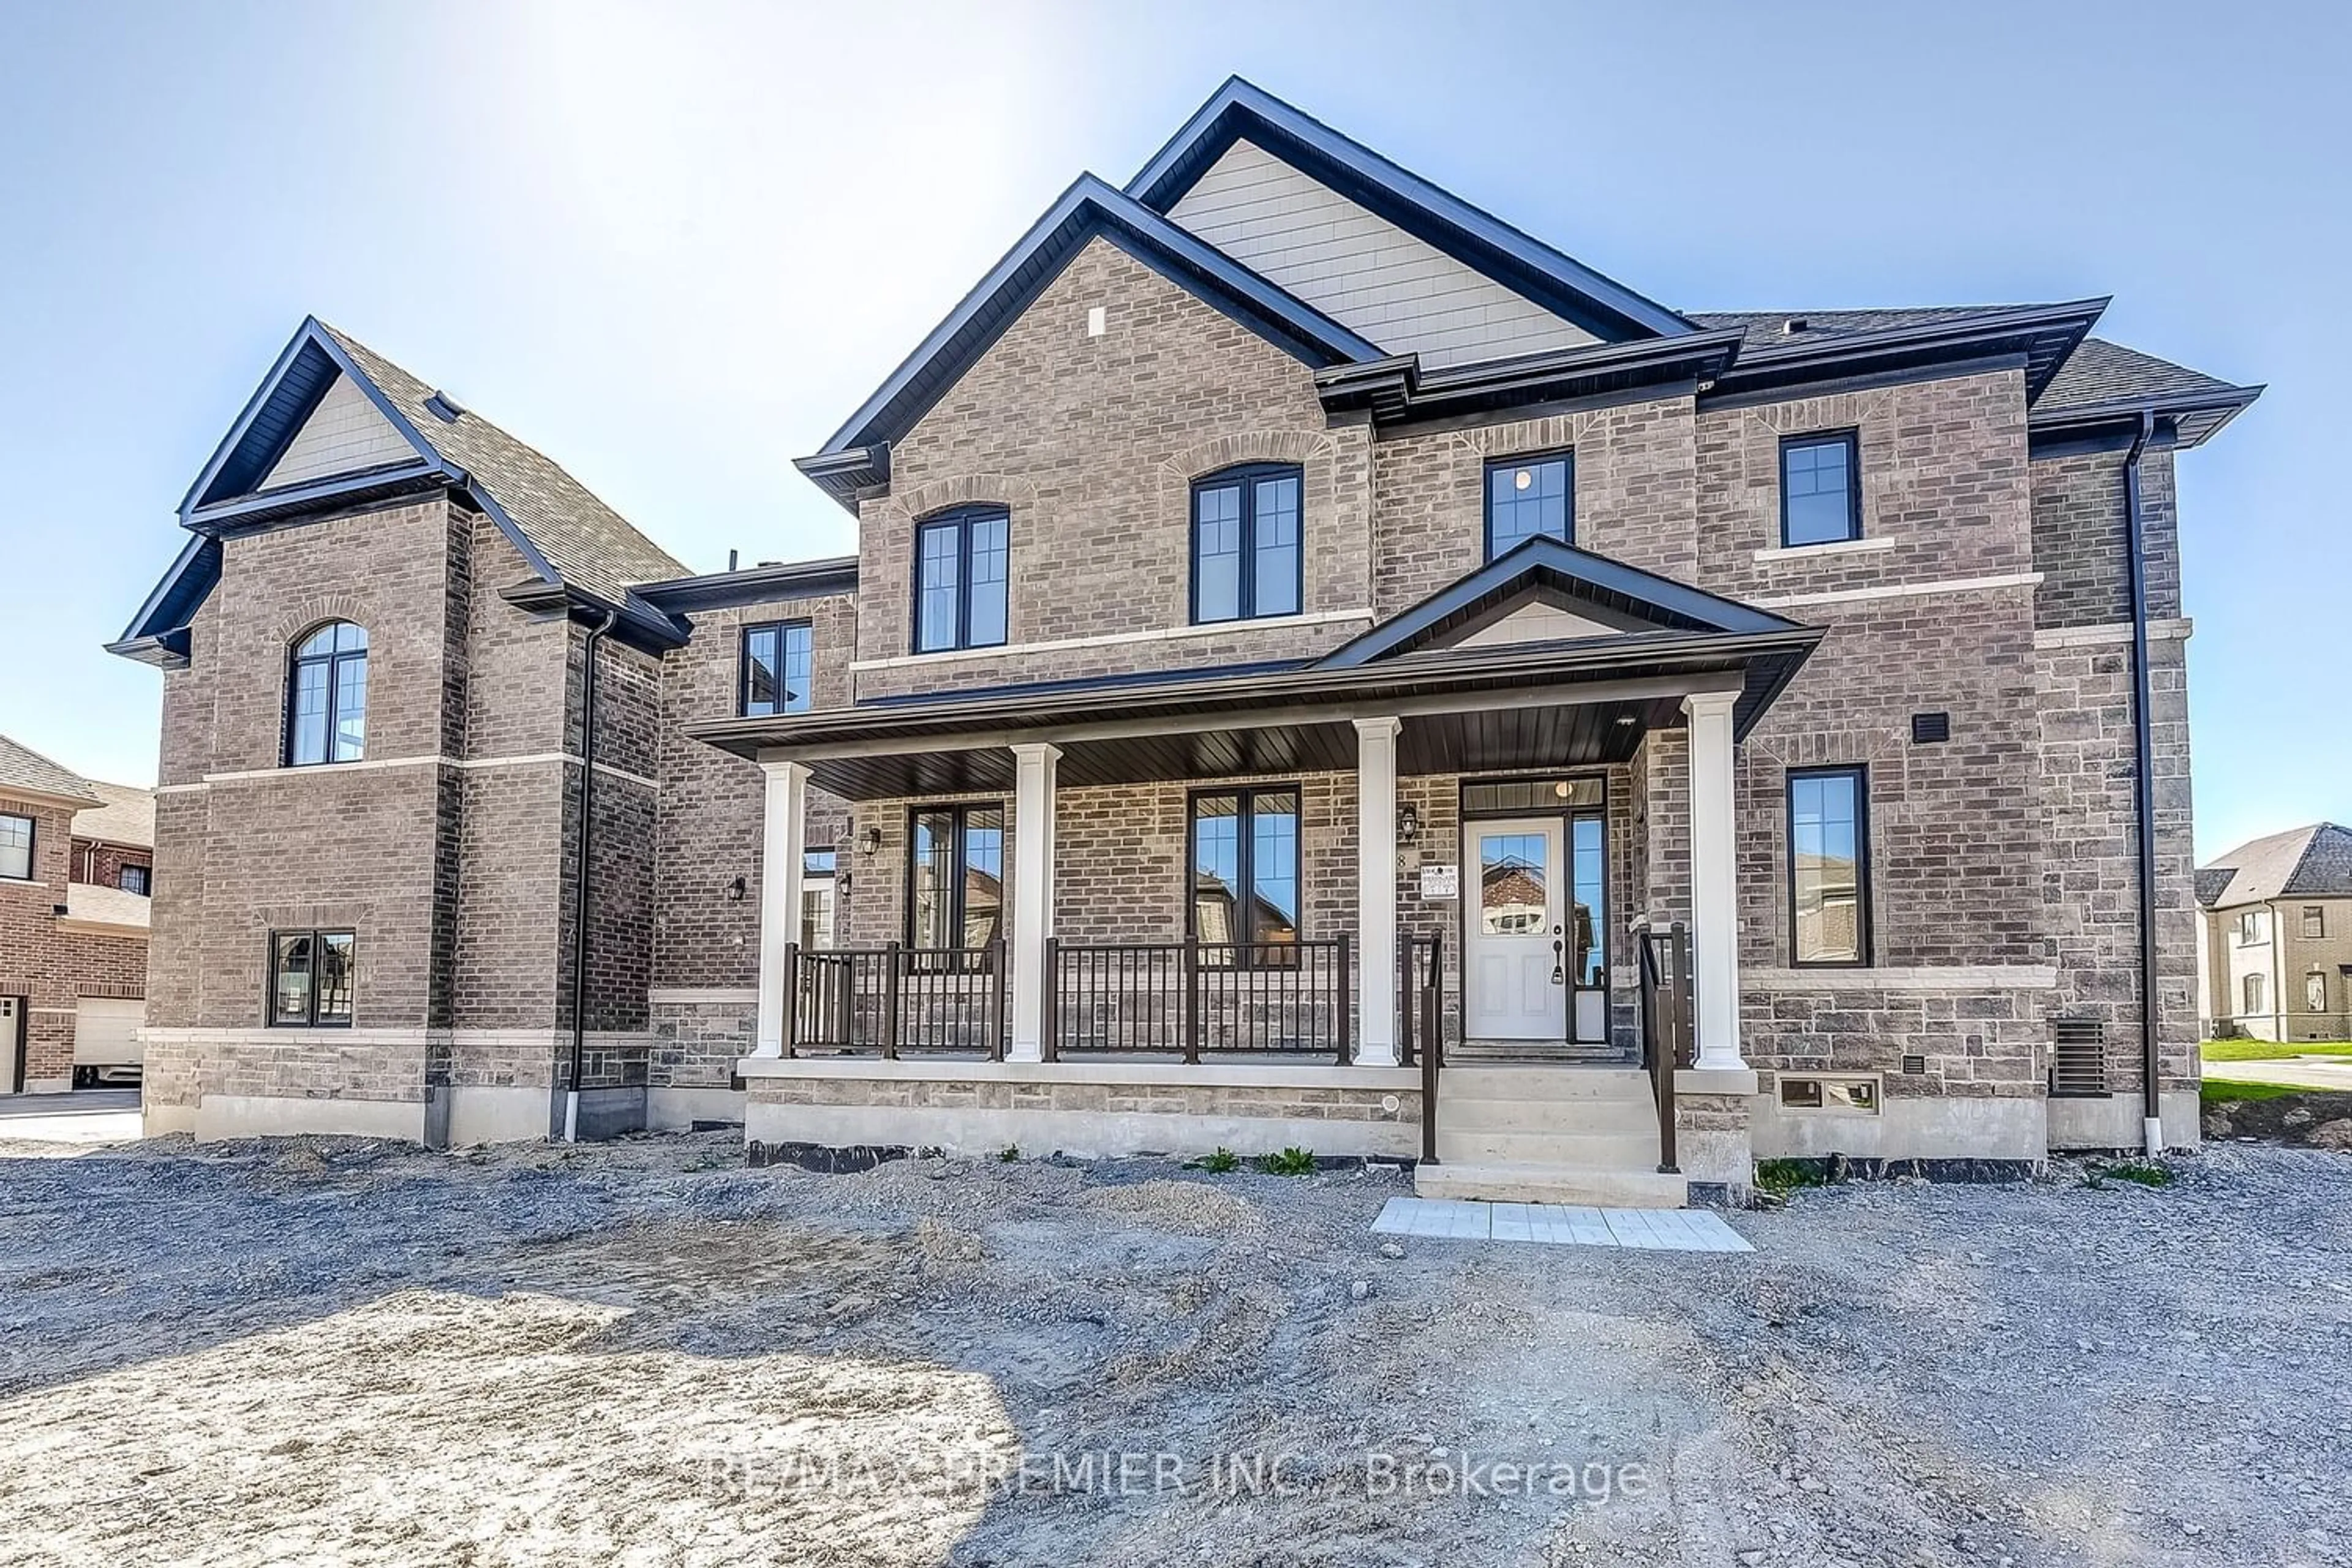 Home with brick exterior material for 8 Thelma Dr, Whitby Ontario L1P 0N3